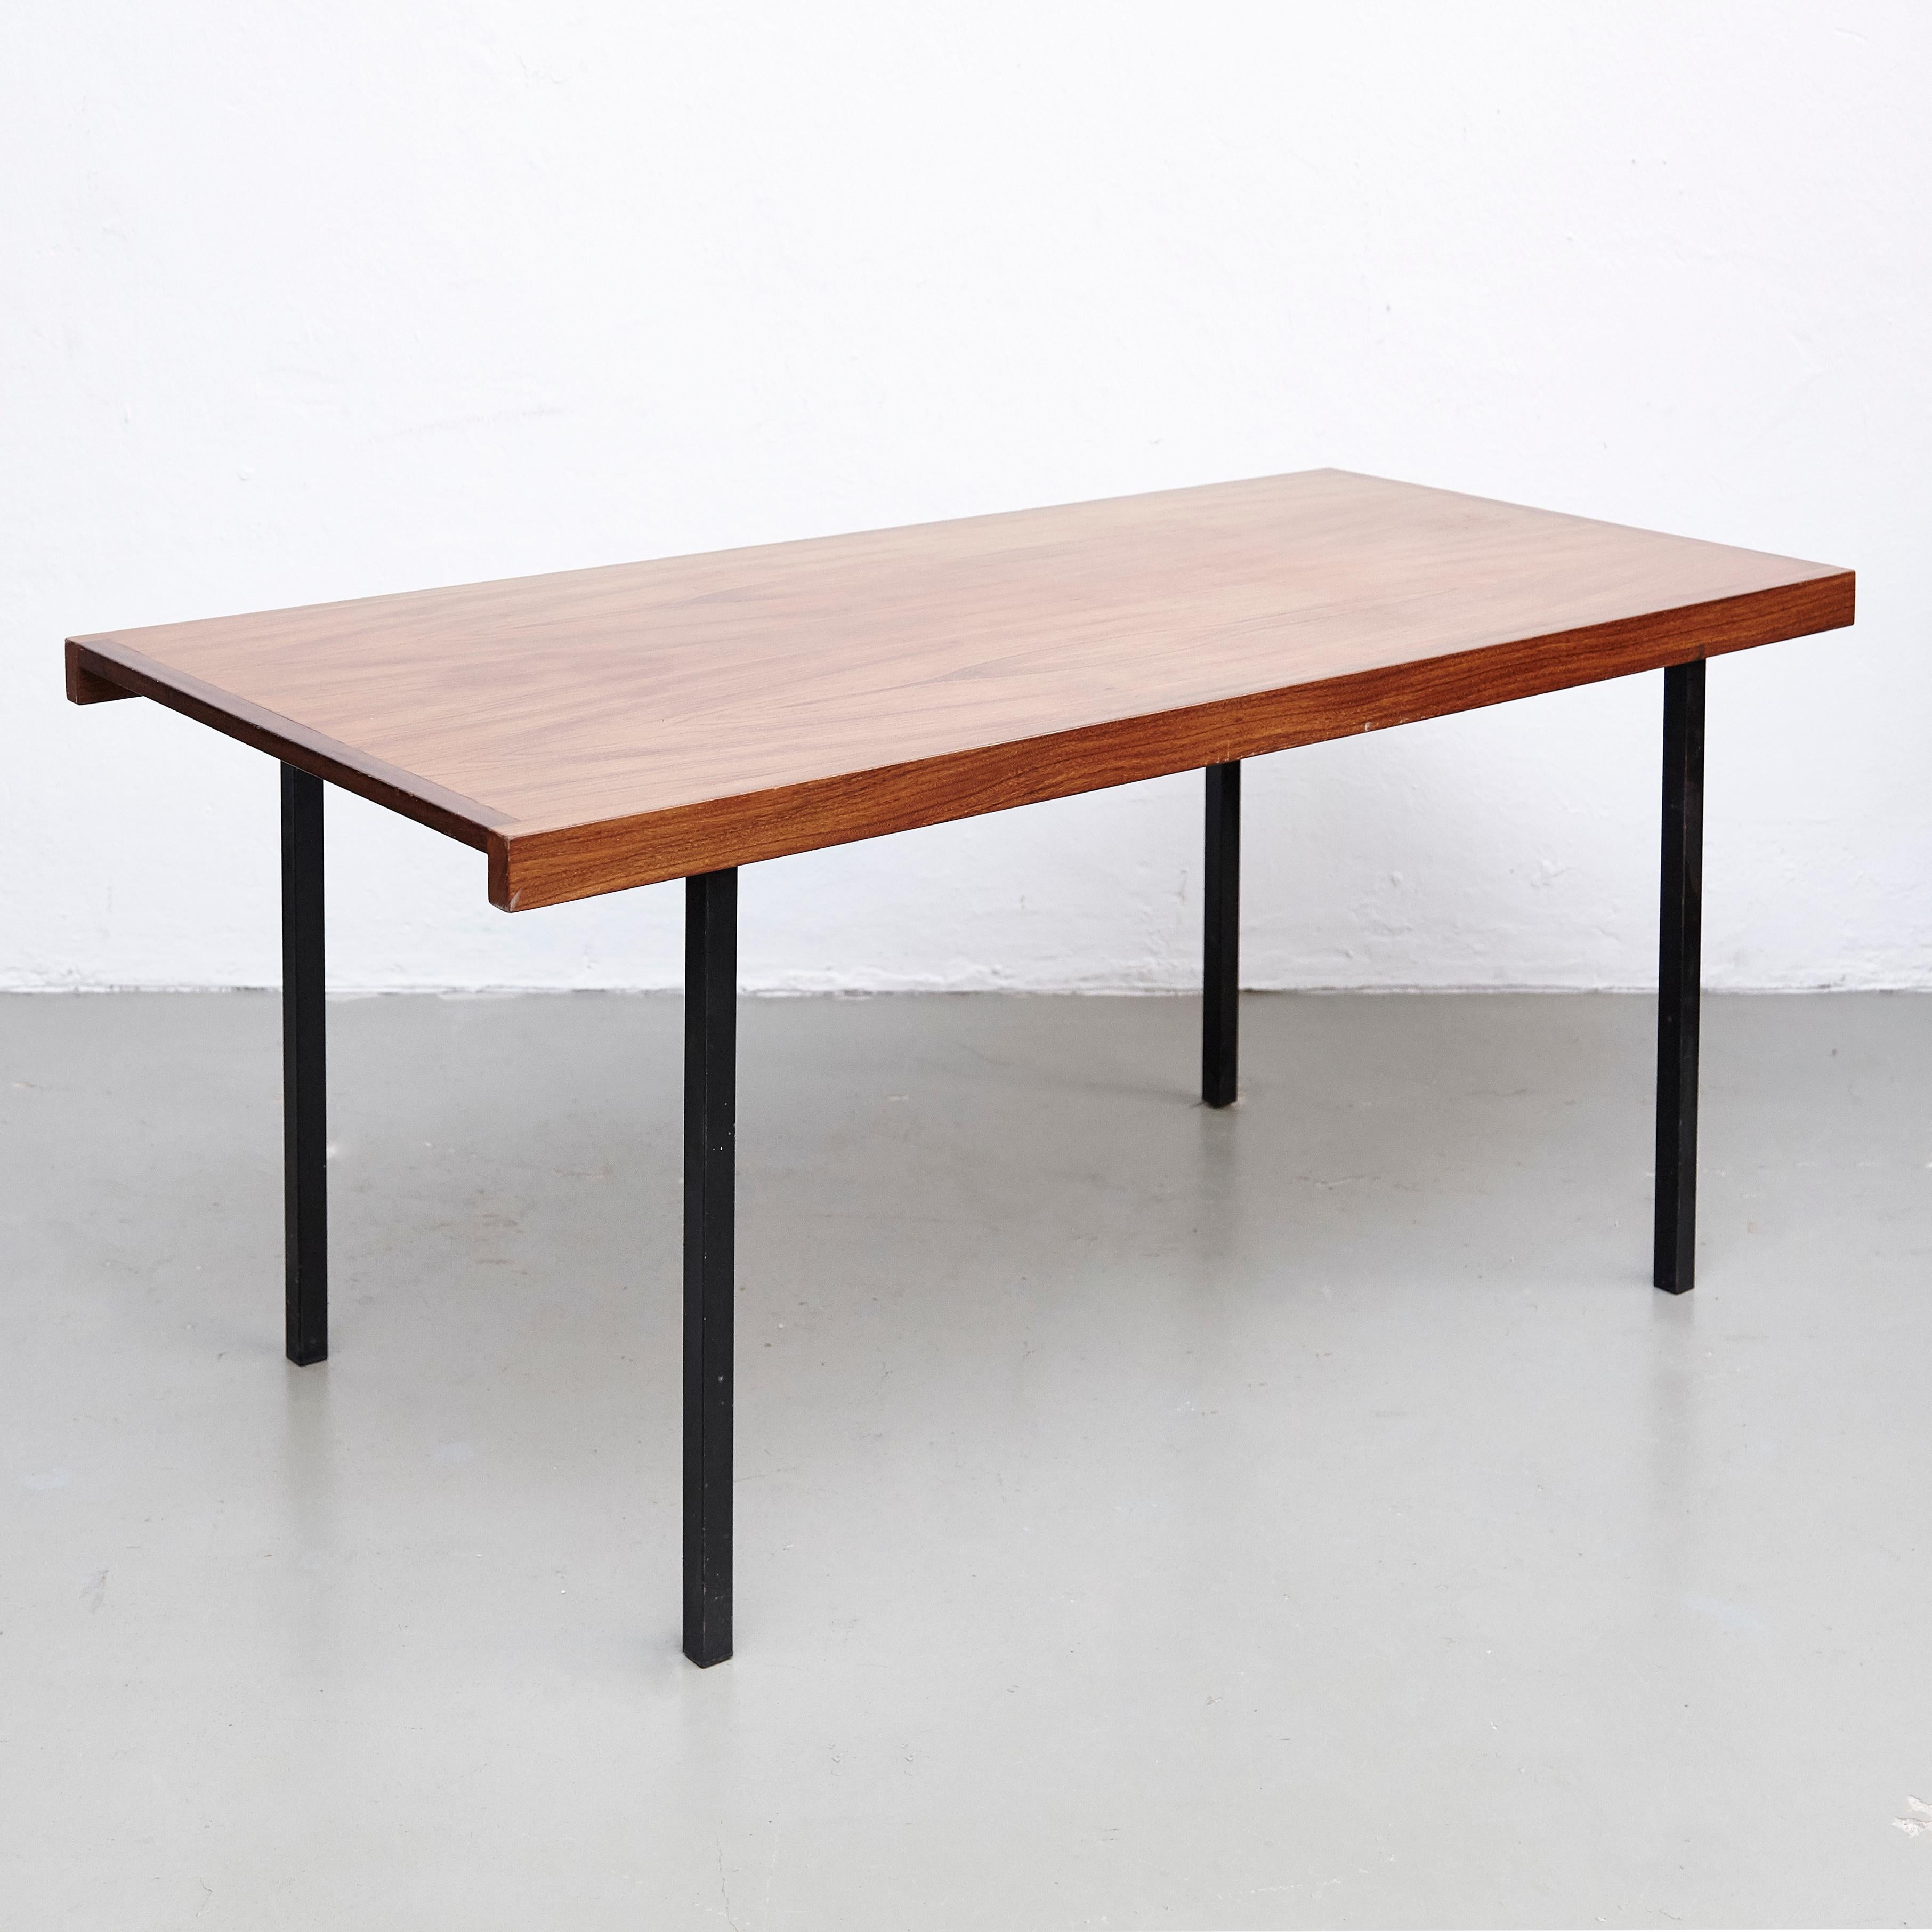 Dinind table designed by Kho Liang Le, circa 1950.
Metal legs and wood tabletop.

In original condition, with minor wear consistent with age and use, preserving a beautiful patina.

Kho Liang Ie (1927- 1975) born in Magelang, Indonesia, of